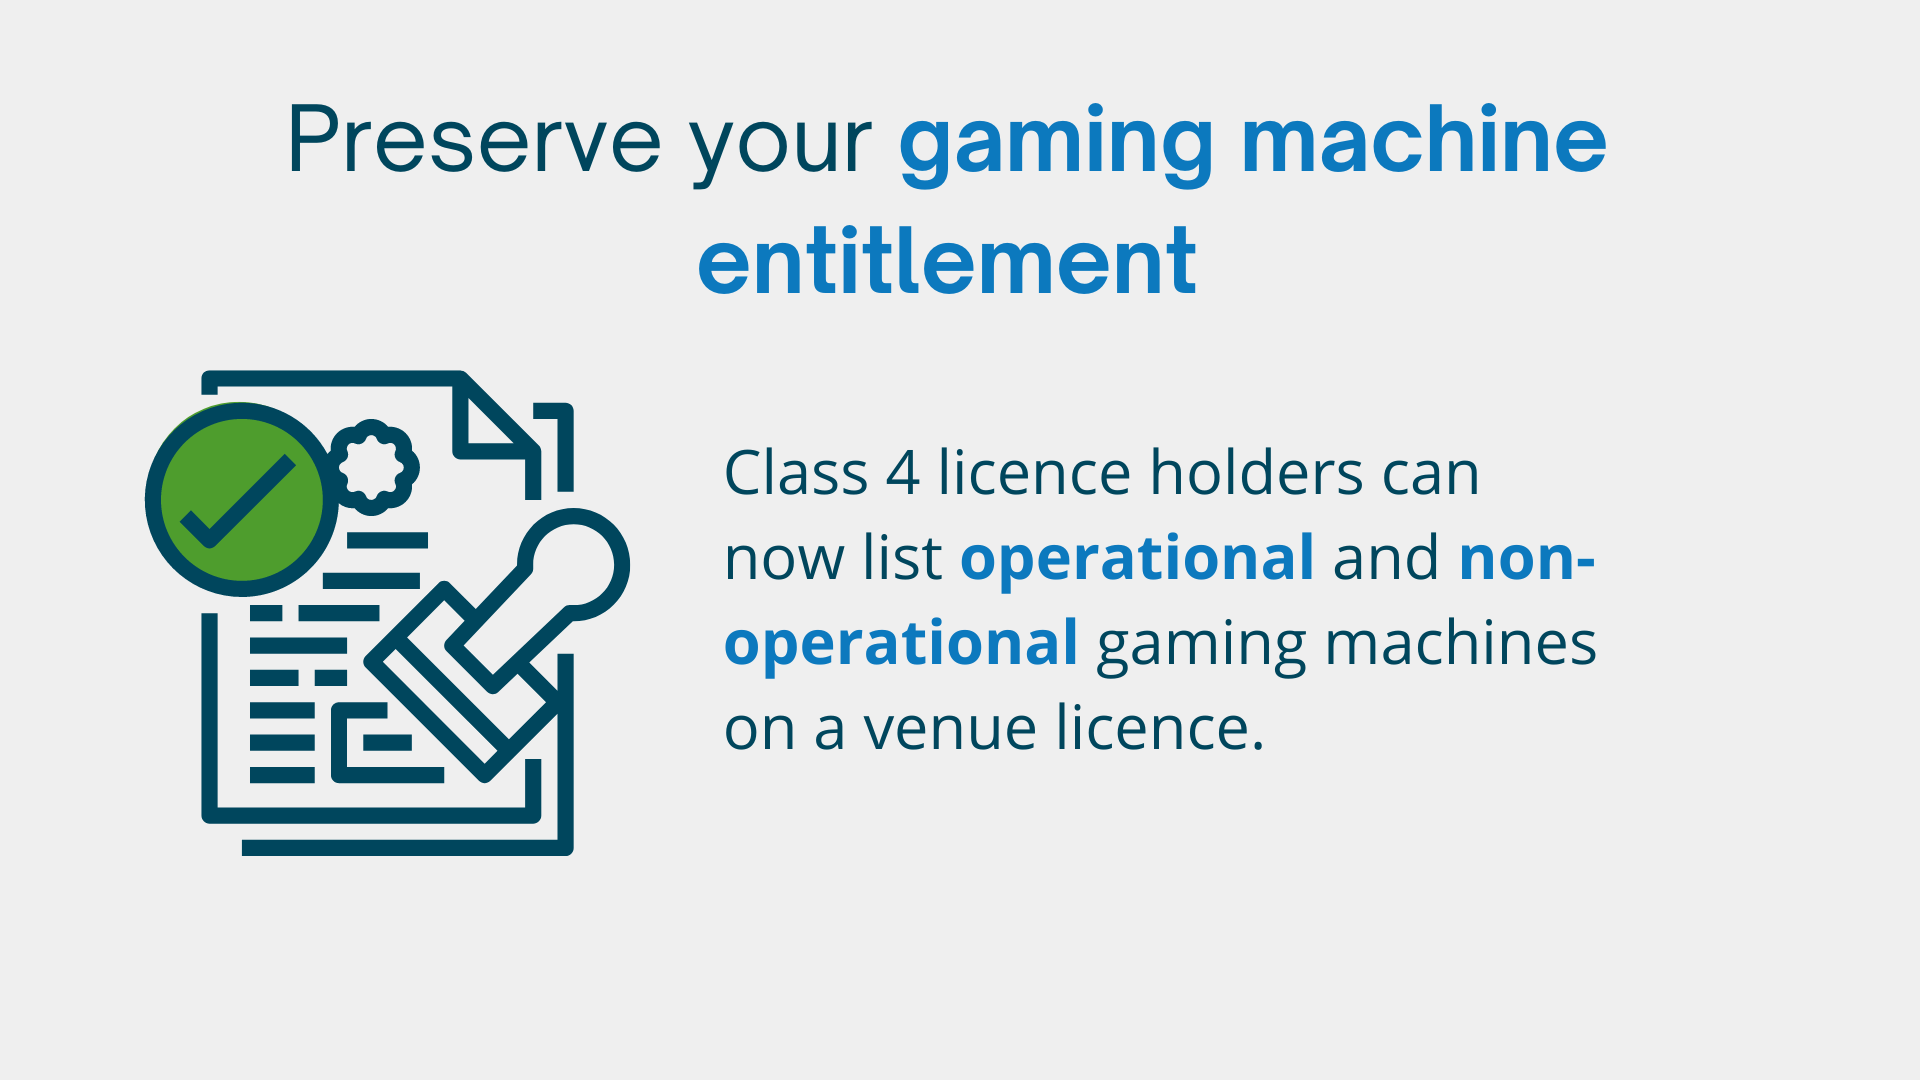 Preserve your gaming machine entitlement: Class 4 licence holders can now list operational and non-operational gaming machines on a venue licence